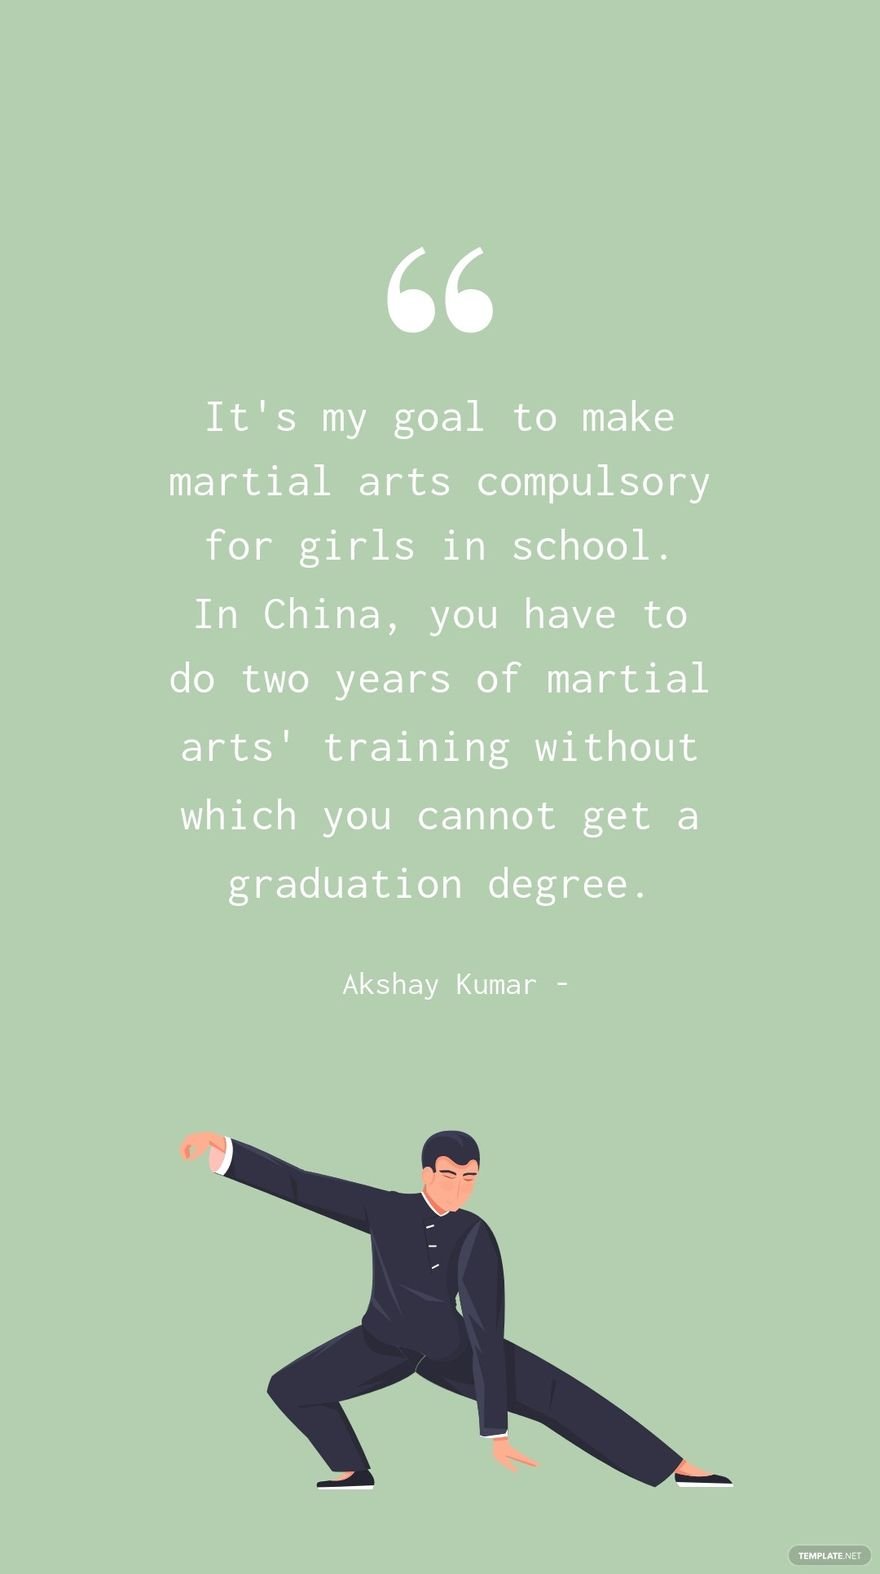 Free Akshay Kumar - It's my goal to make martial arts compulsory for girls in school. In China, you have to do two years of martial arts' training without which you cannot get a graduation degree.